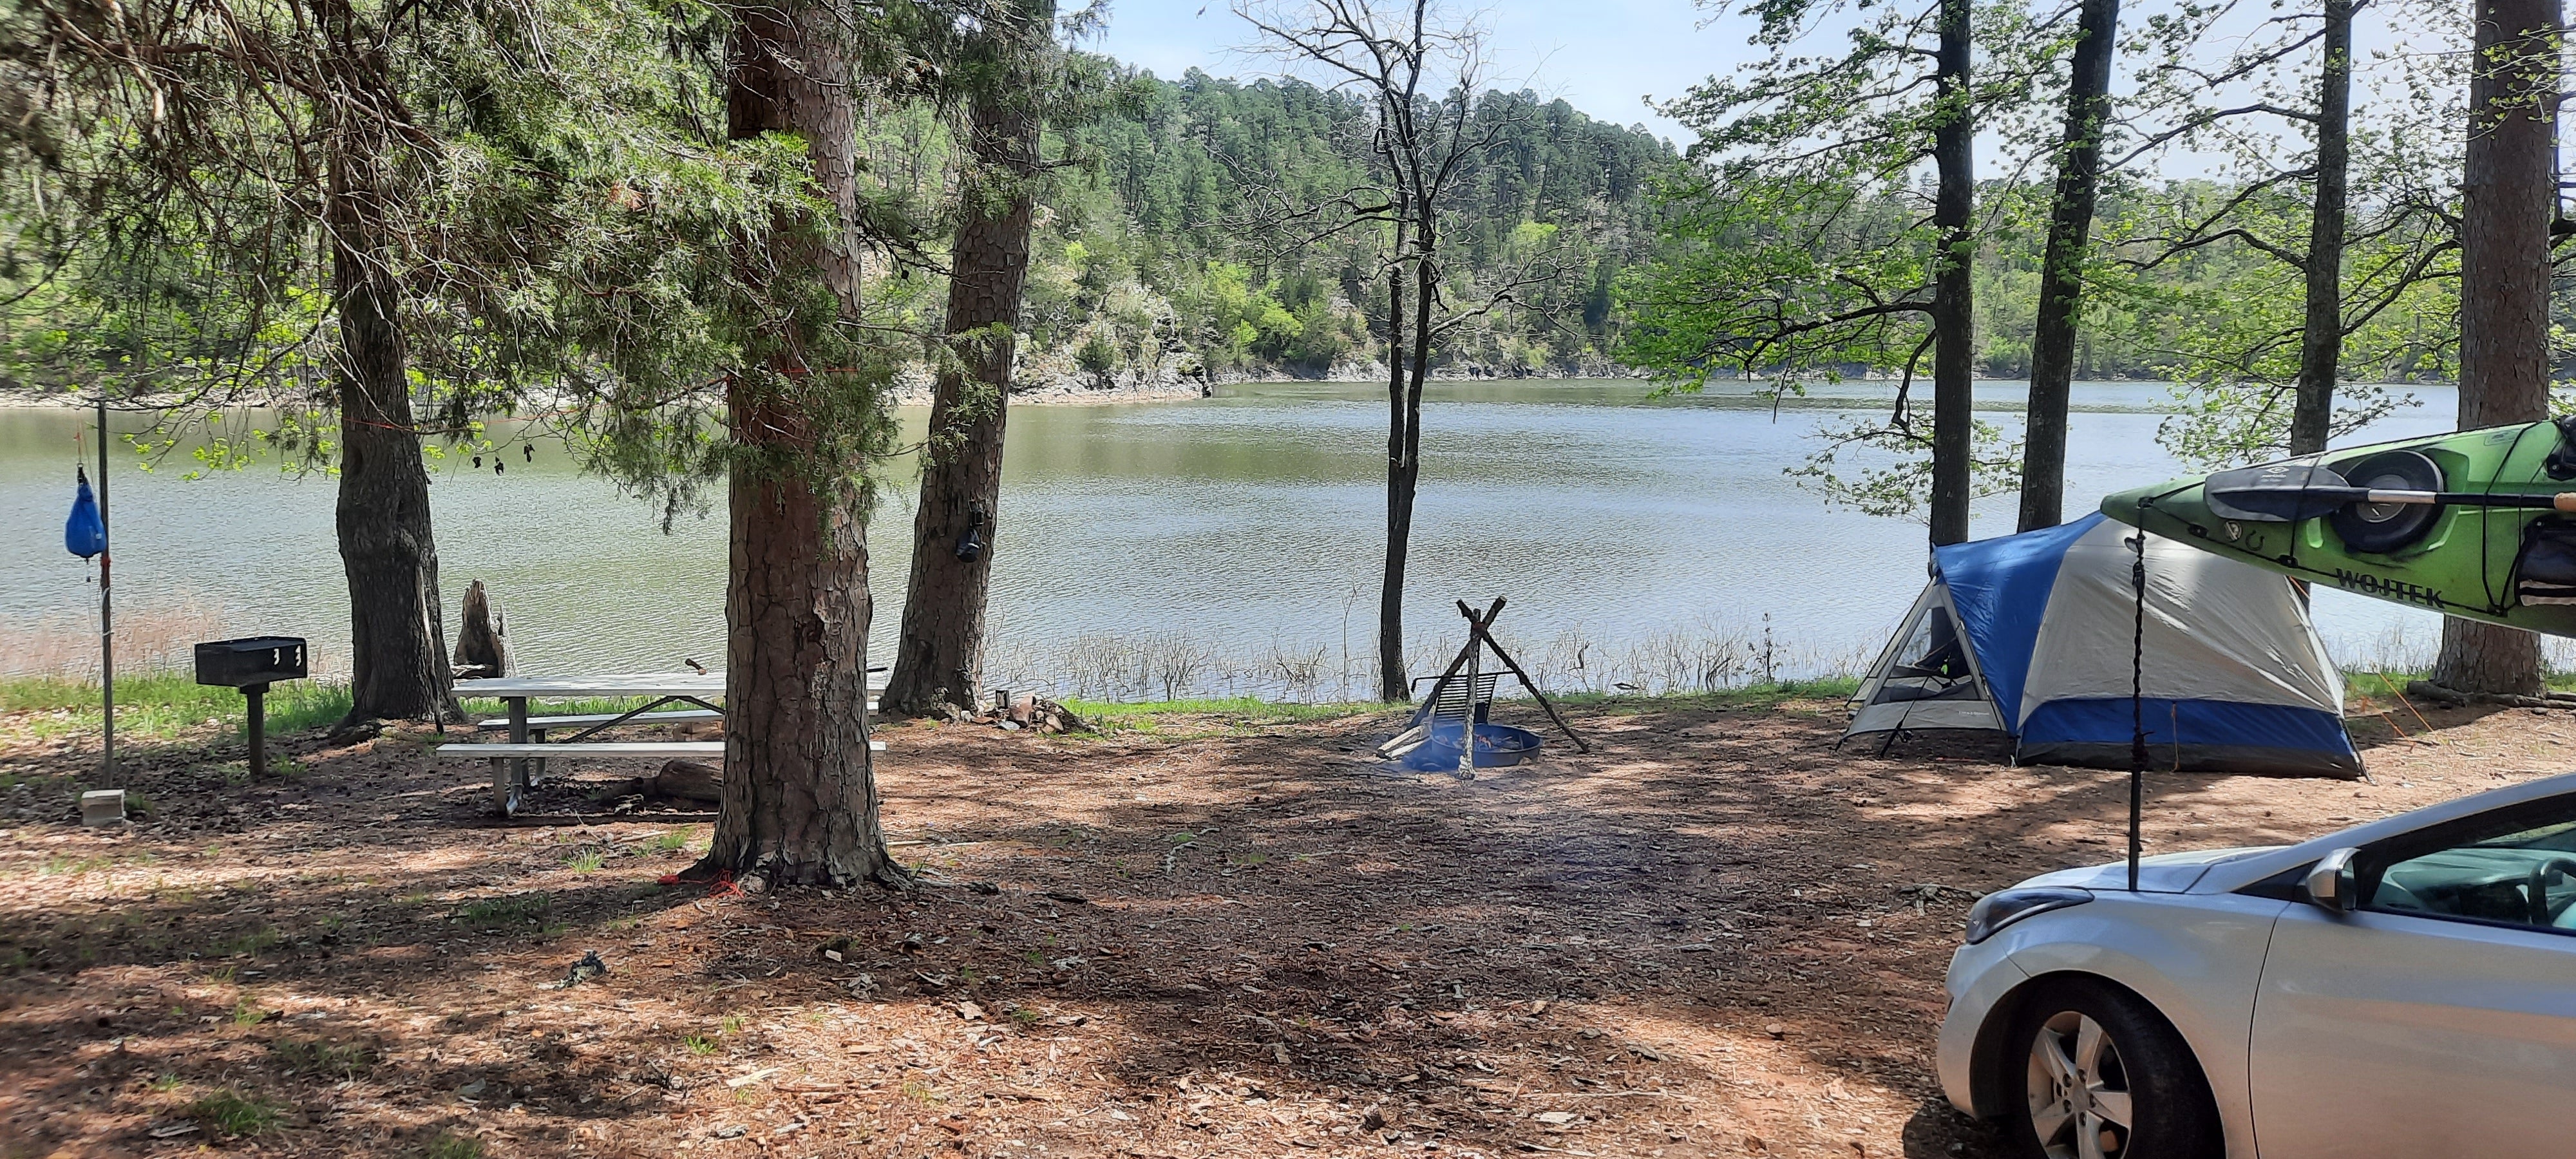 Camper submitted image from Irons Fork Primitive Camping - 2